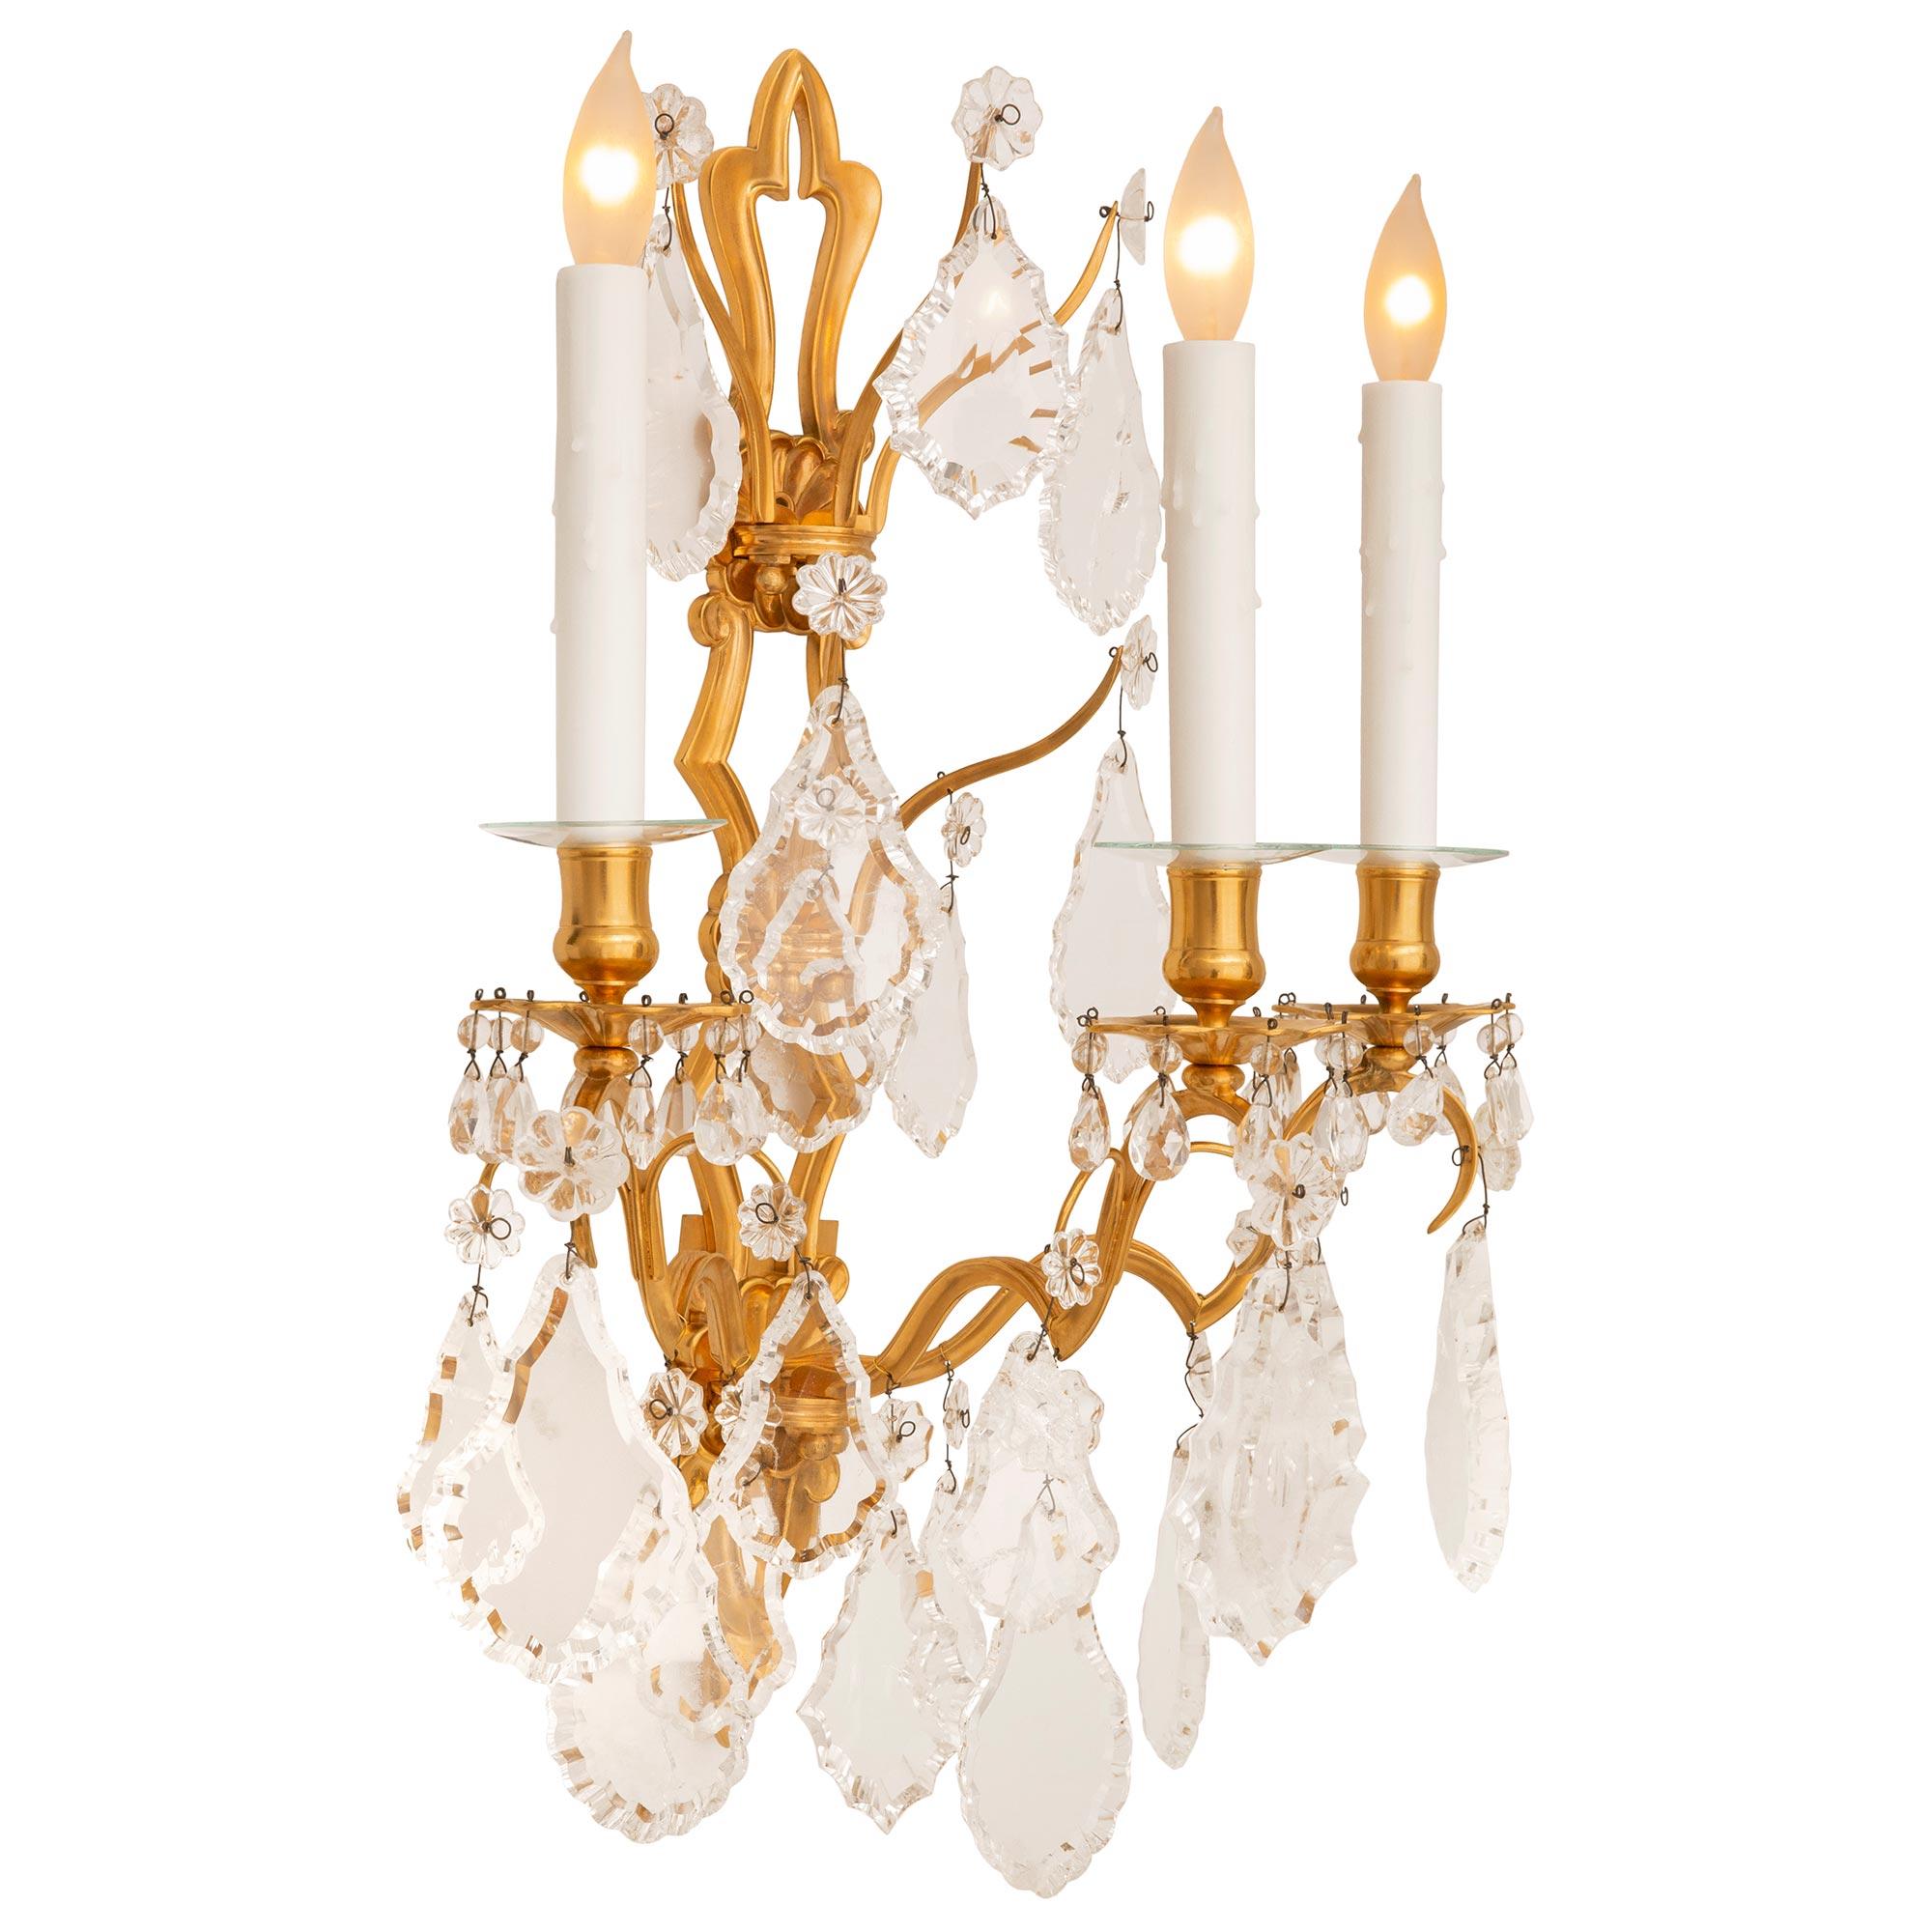 An elegant and finely detailed pair of French 19th century Louis XV st. Ormolu and Rock Crystal sconces. Each scrolling three arm sconce is tastefully decorated with large scaled scalloped Rock Crystals with smaller scale scalloped Rock Crystals